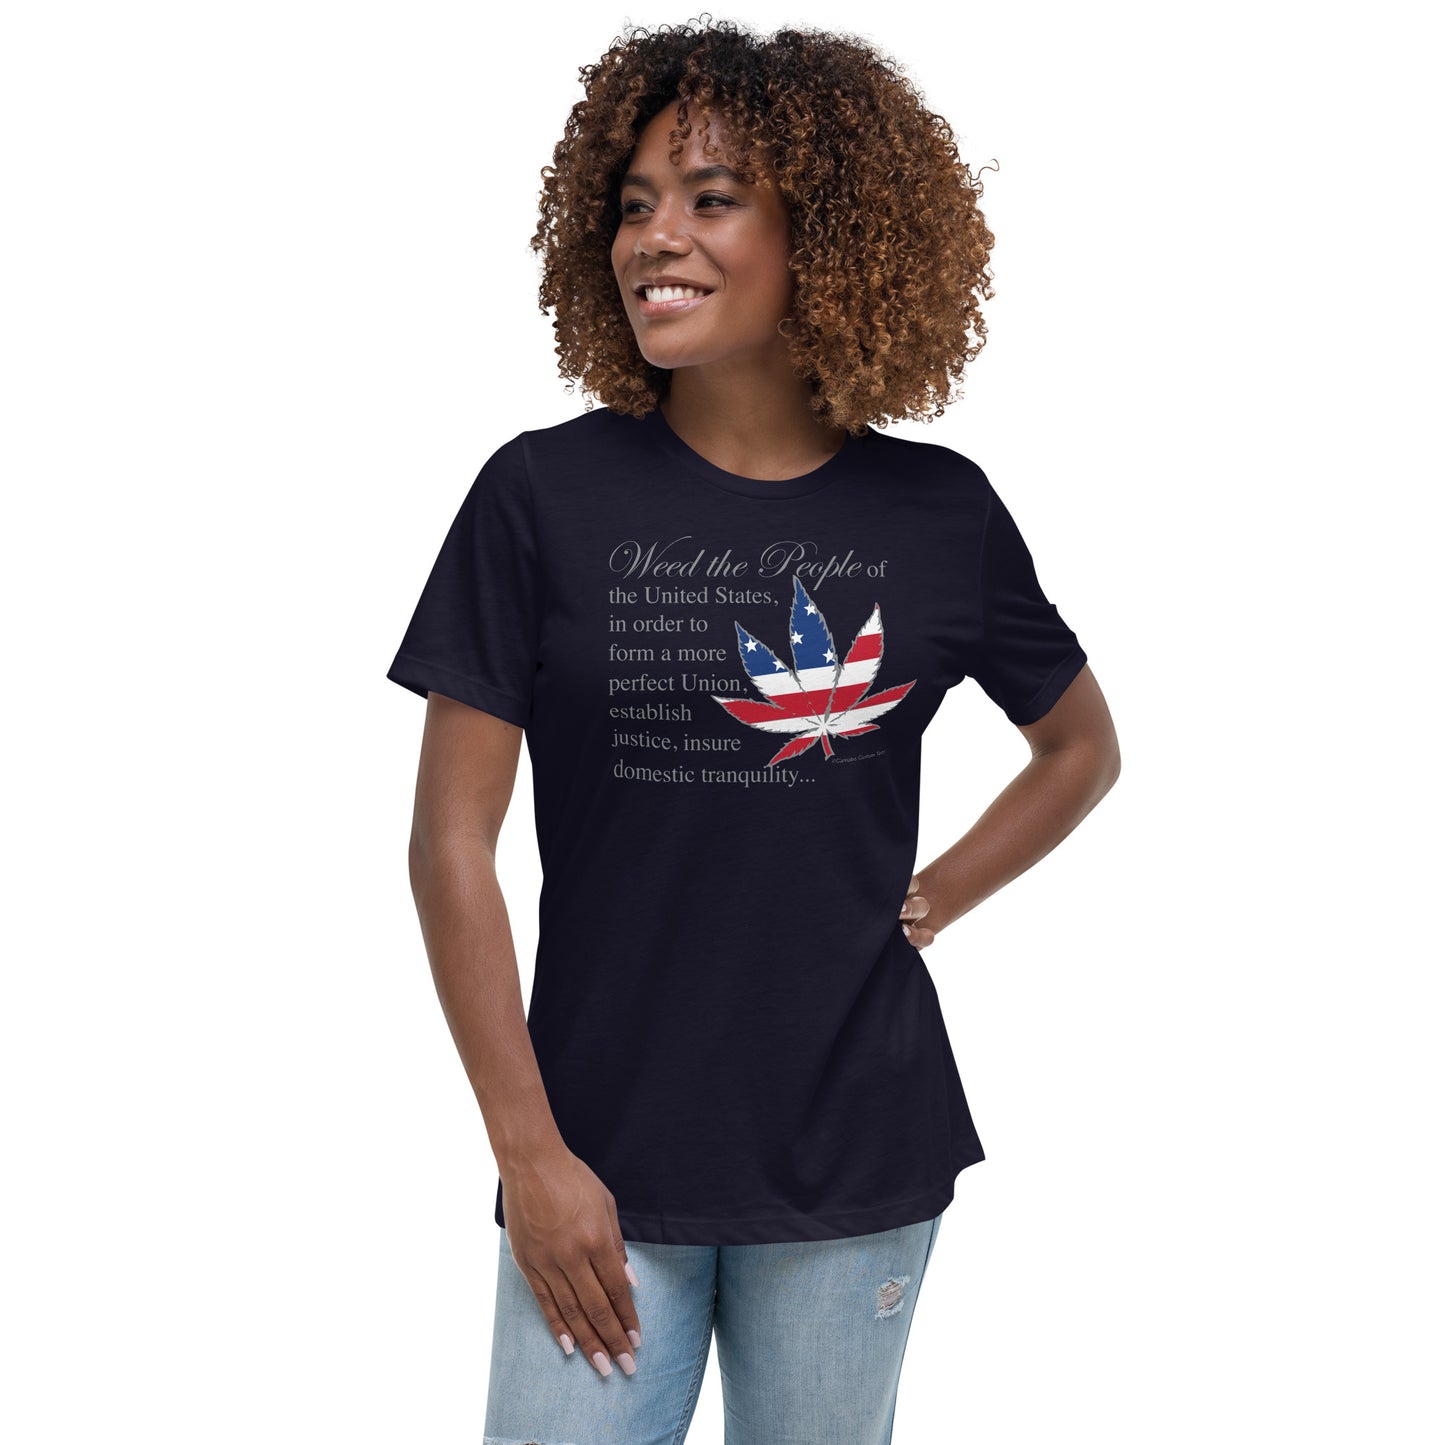 Weed the People P425 Women's Relaxed T-Shirt